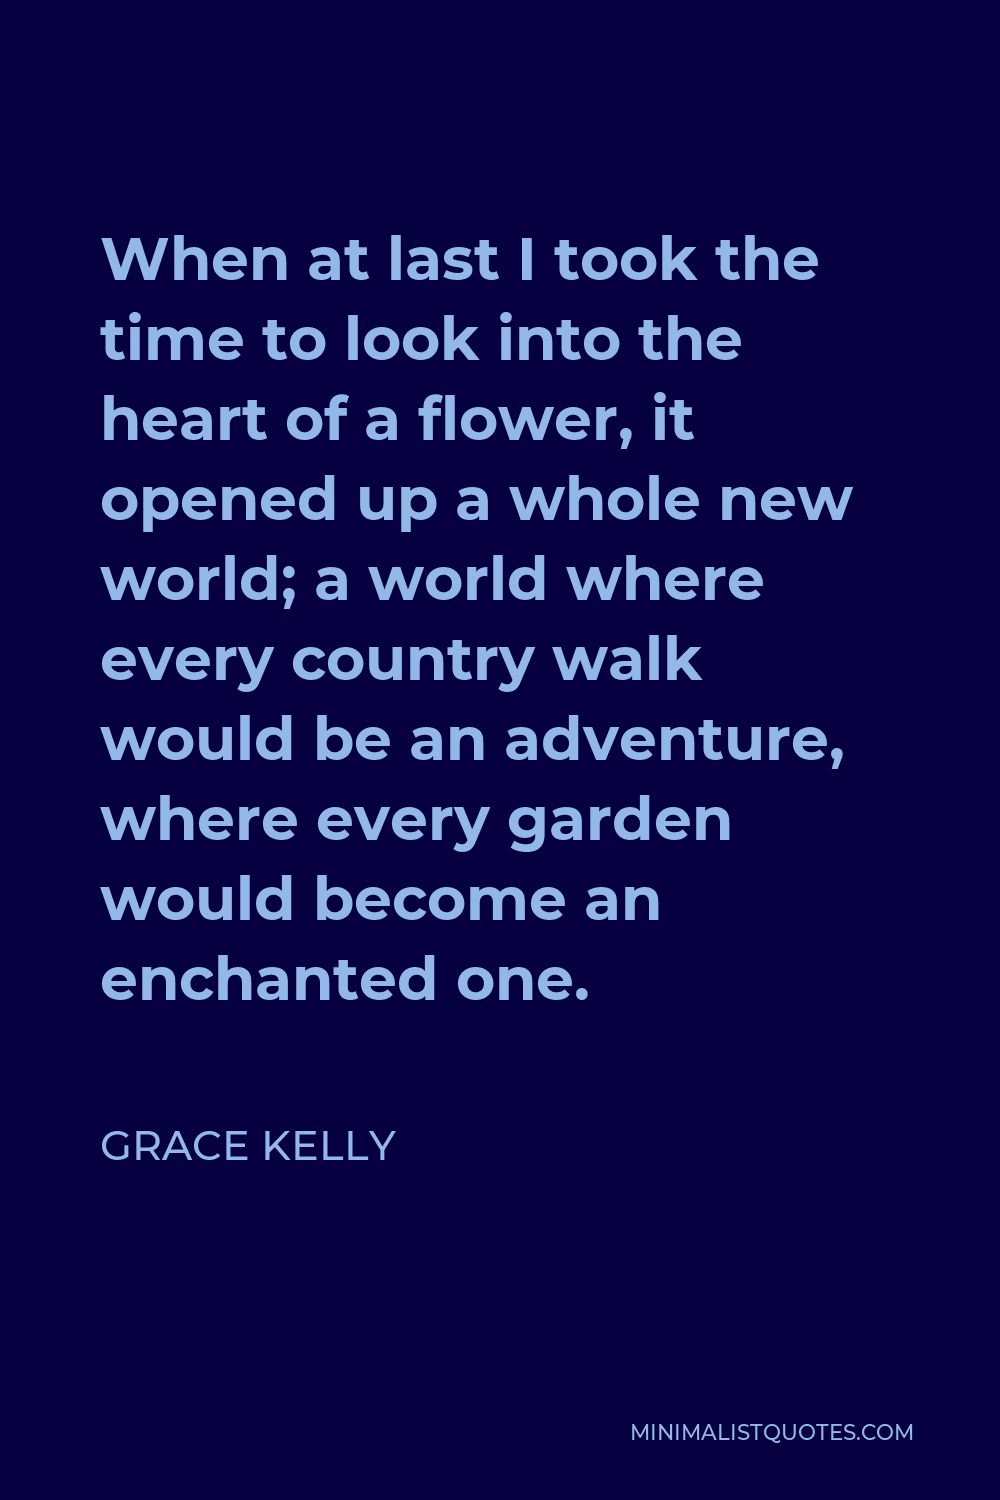 Grace Kelly Quote - When at last I took the time to look into the heart of a flower, it opened up a whole new world; a world where every country walk would be an adventure, where every garden would become an enchanted one.